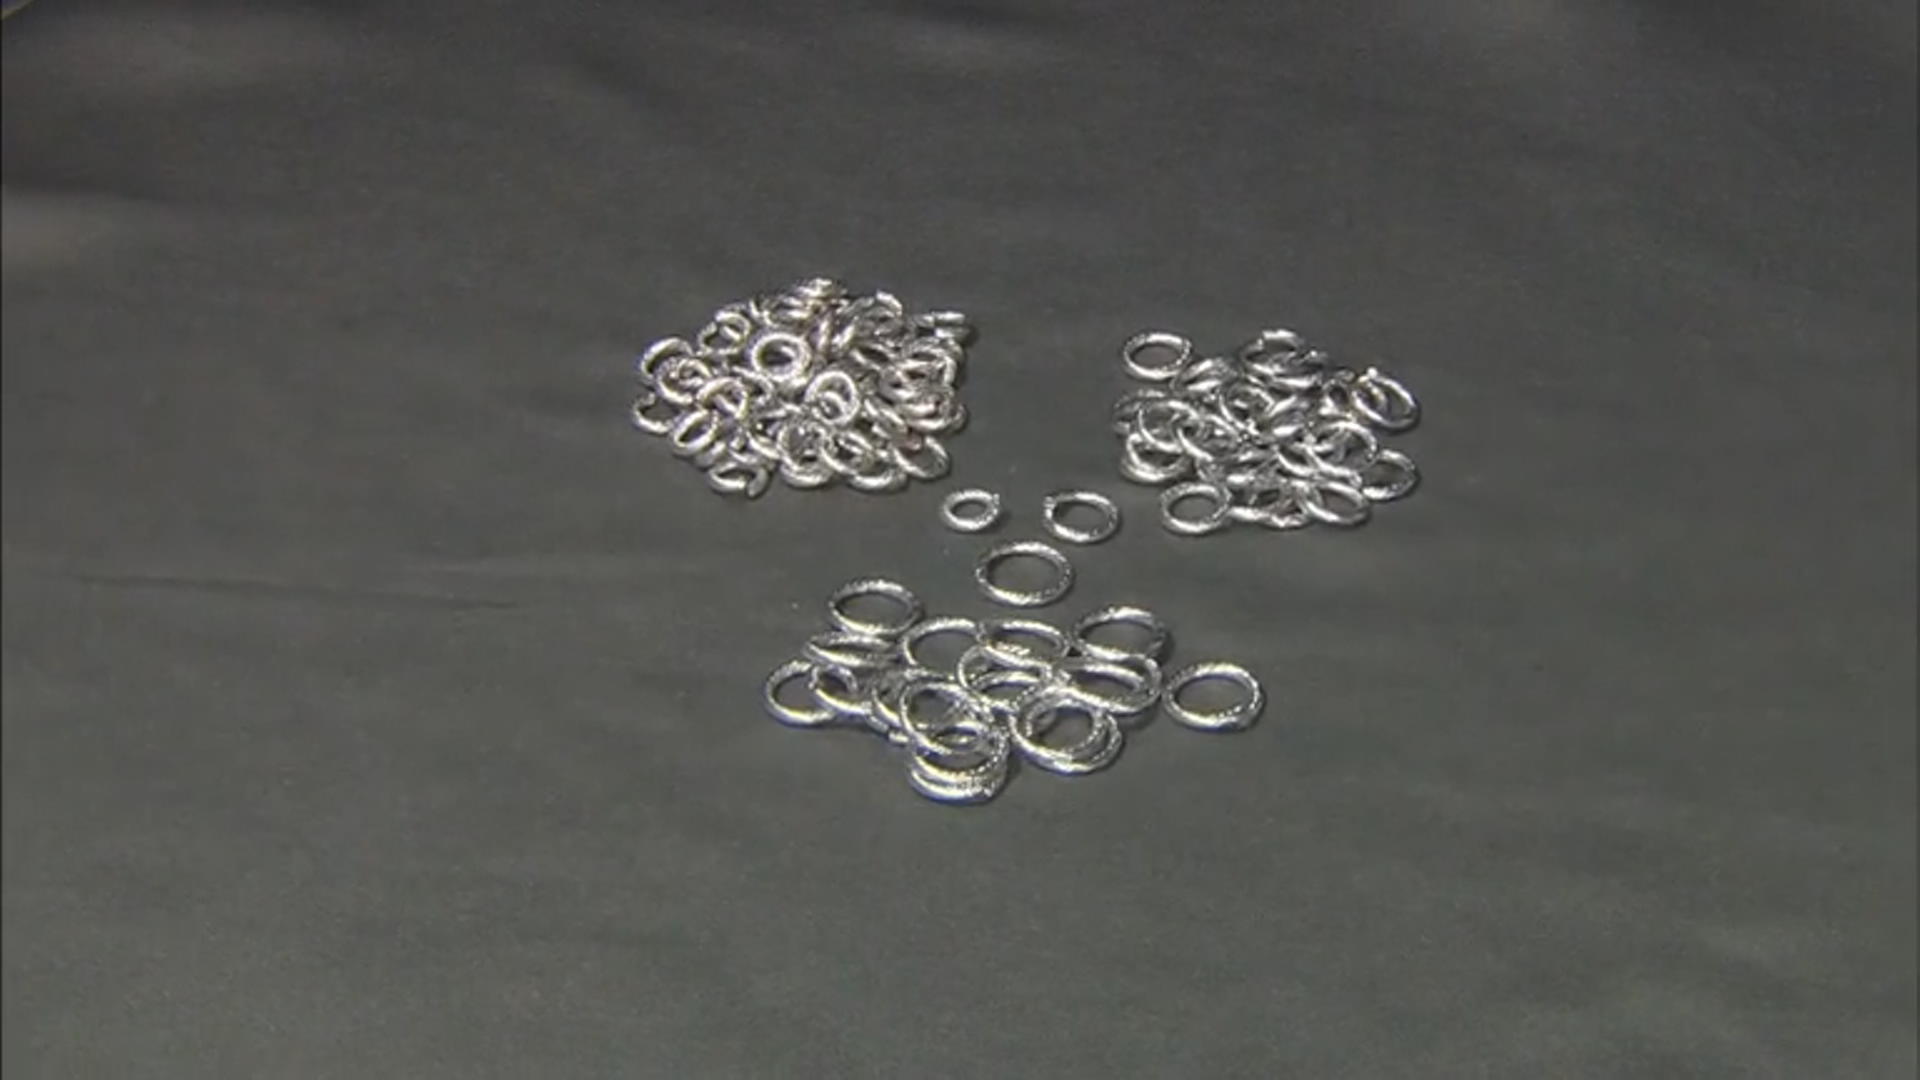 Stainless Steel Twisted Textured Jump Rings in 3 Sizes Appx 100 Pieces Total Video Thumbnail